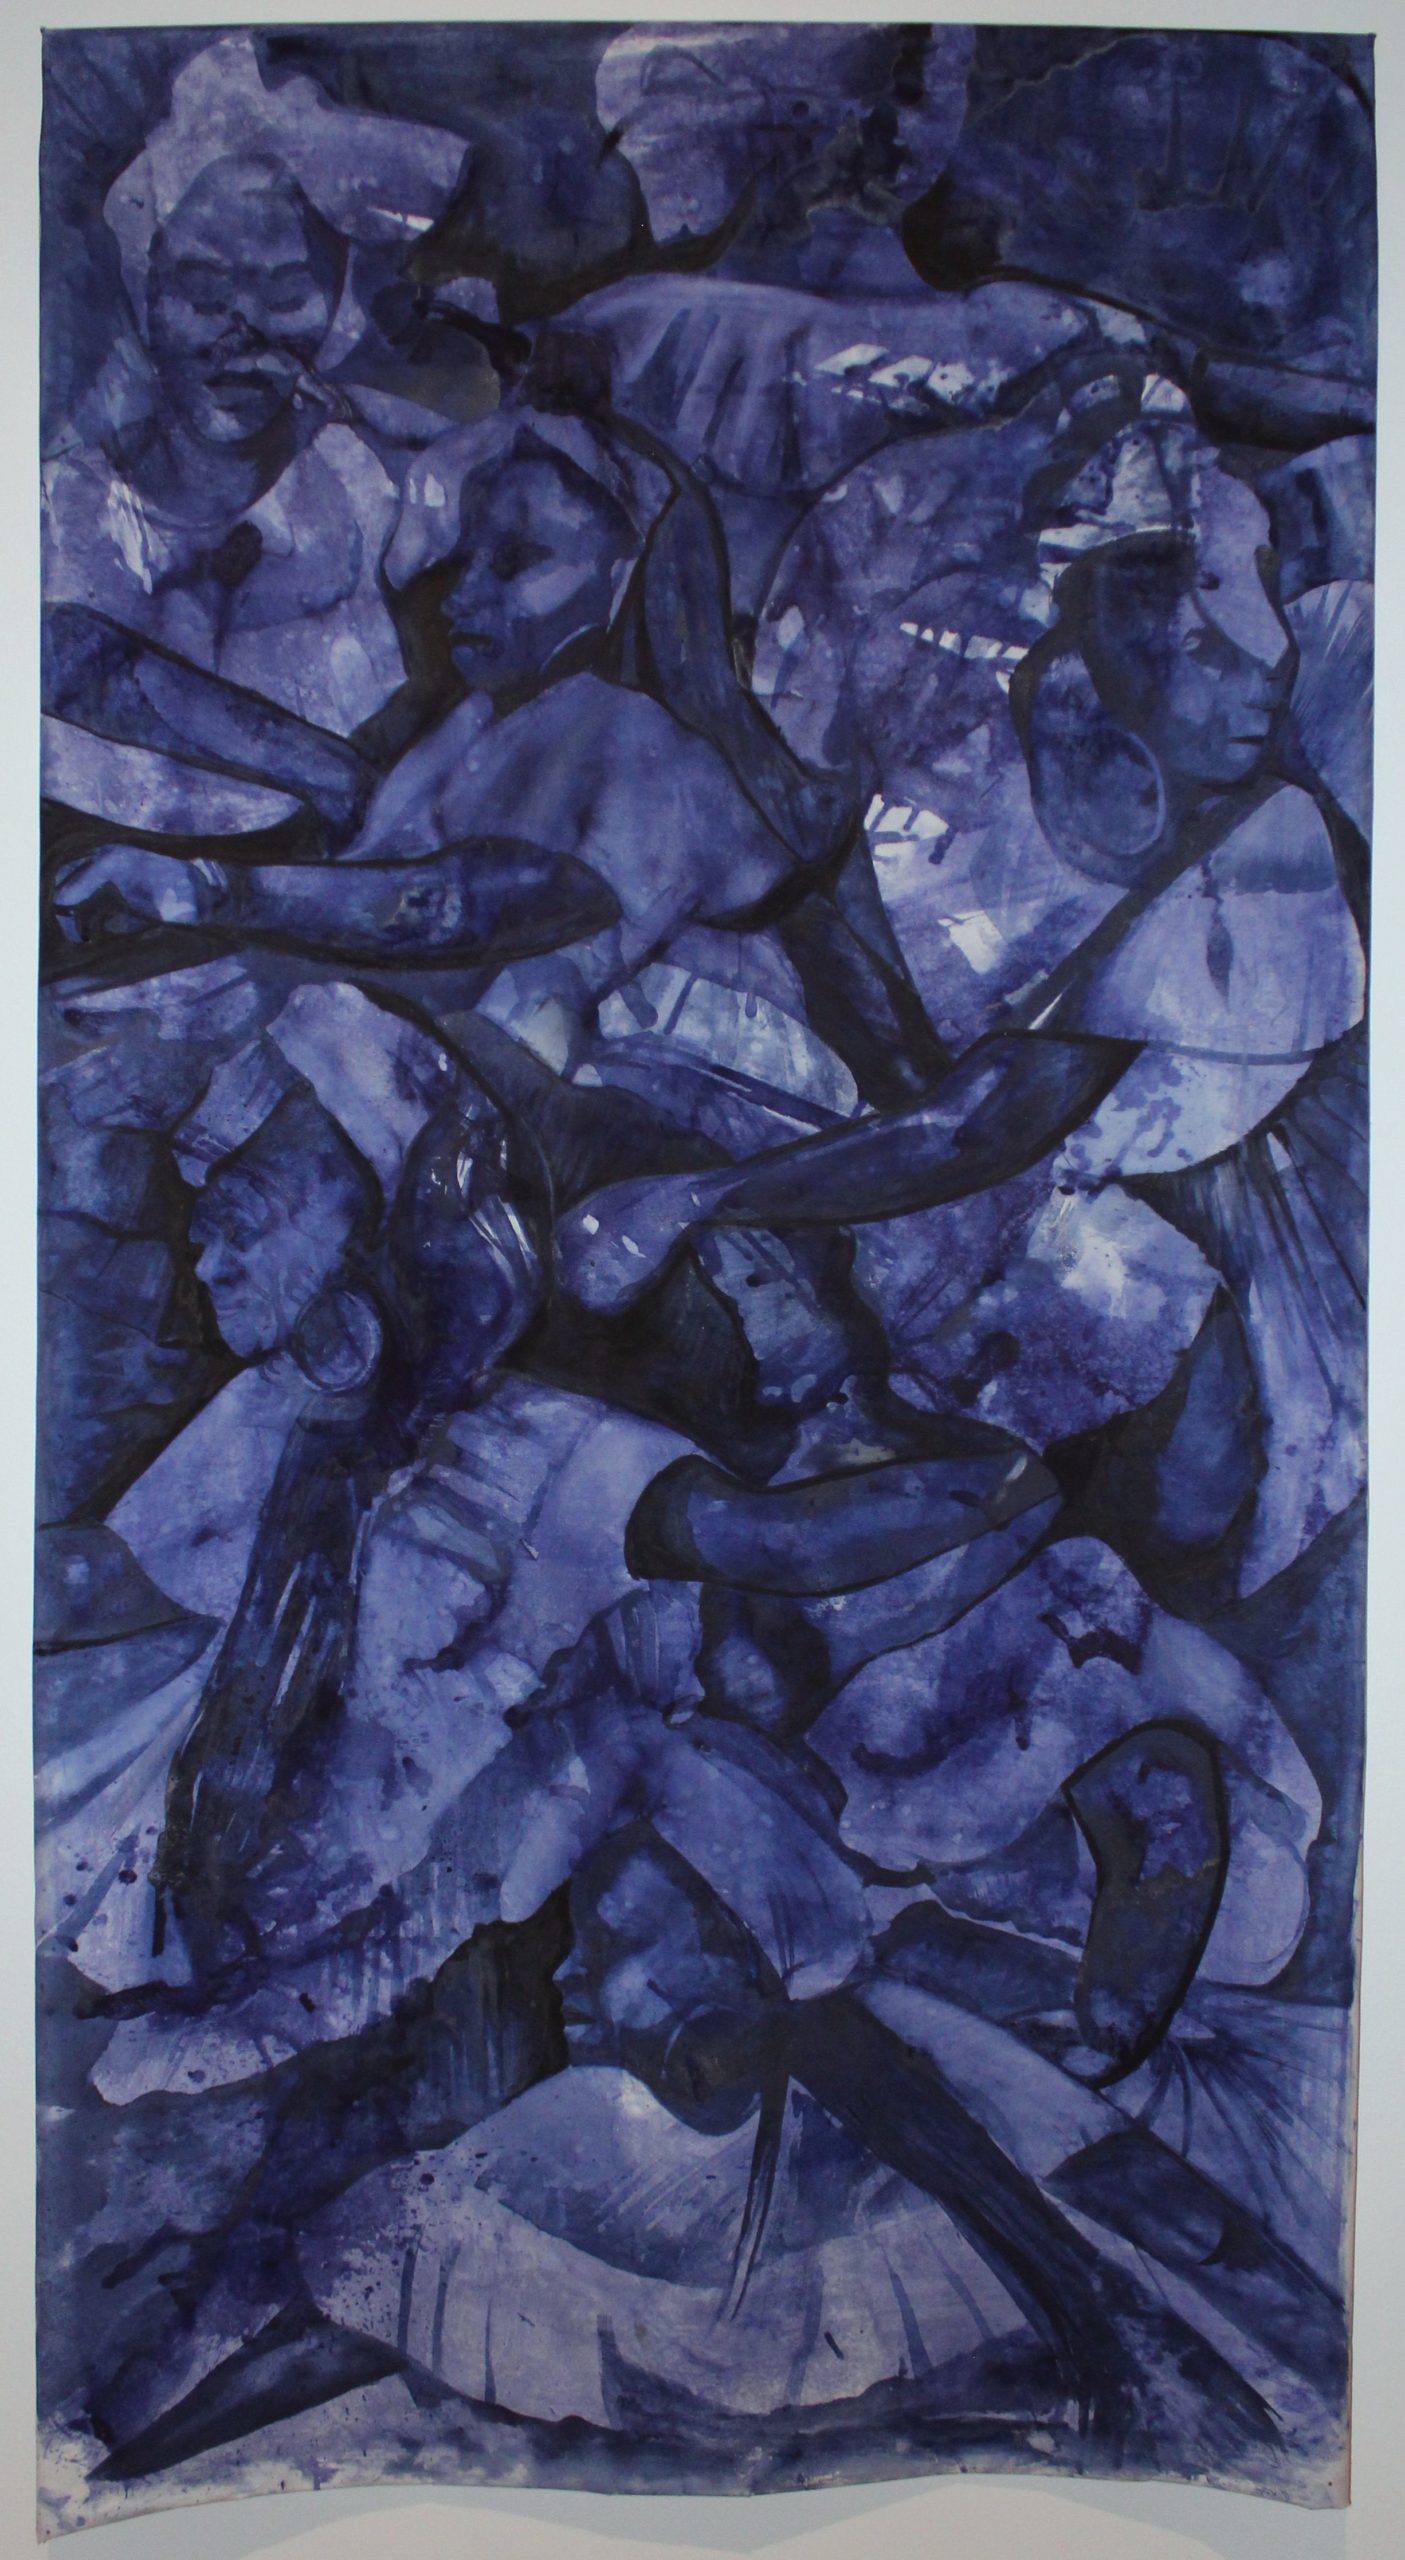 Unstretched canvas depicting multiple abstracted figures in blue dresses and blue headwear with arms holding out to one another.